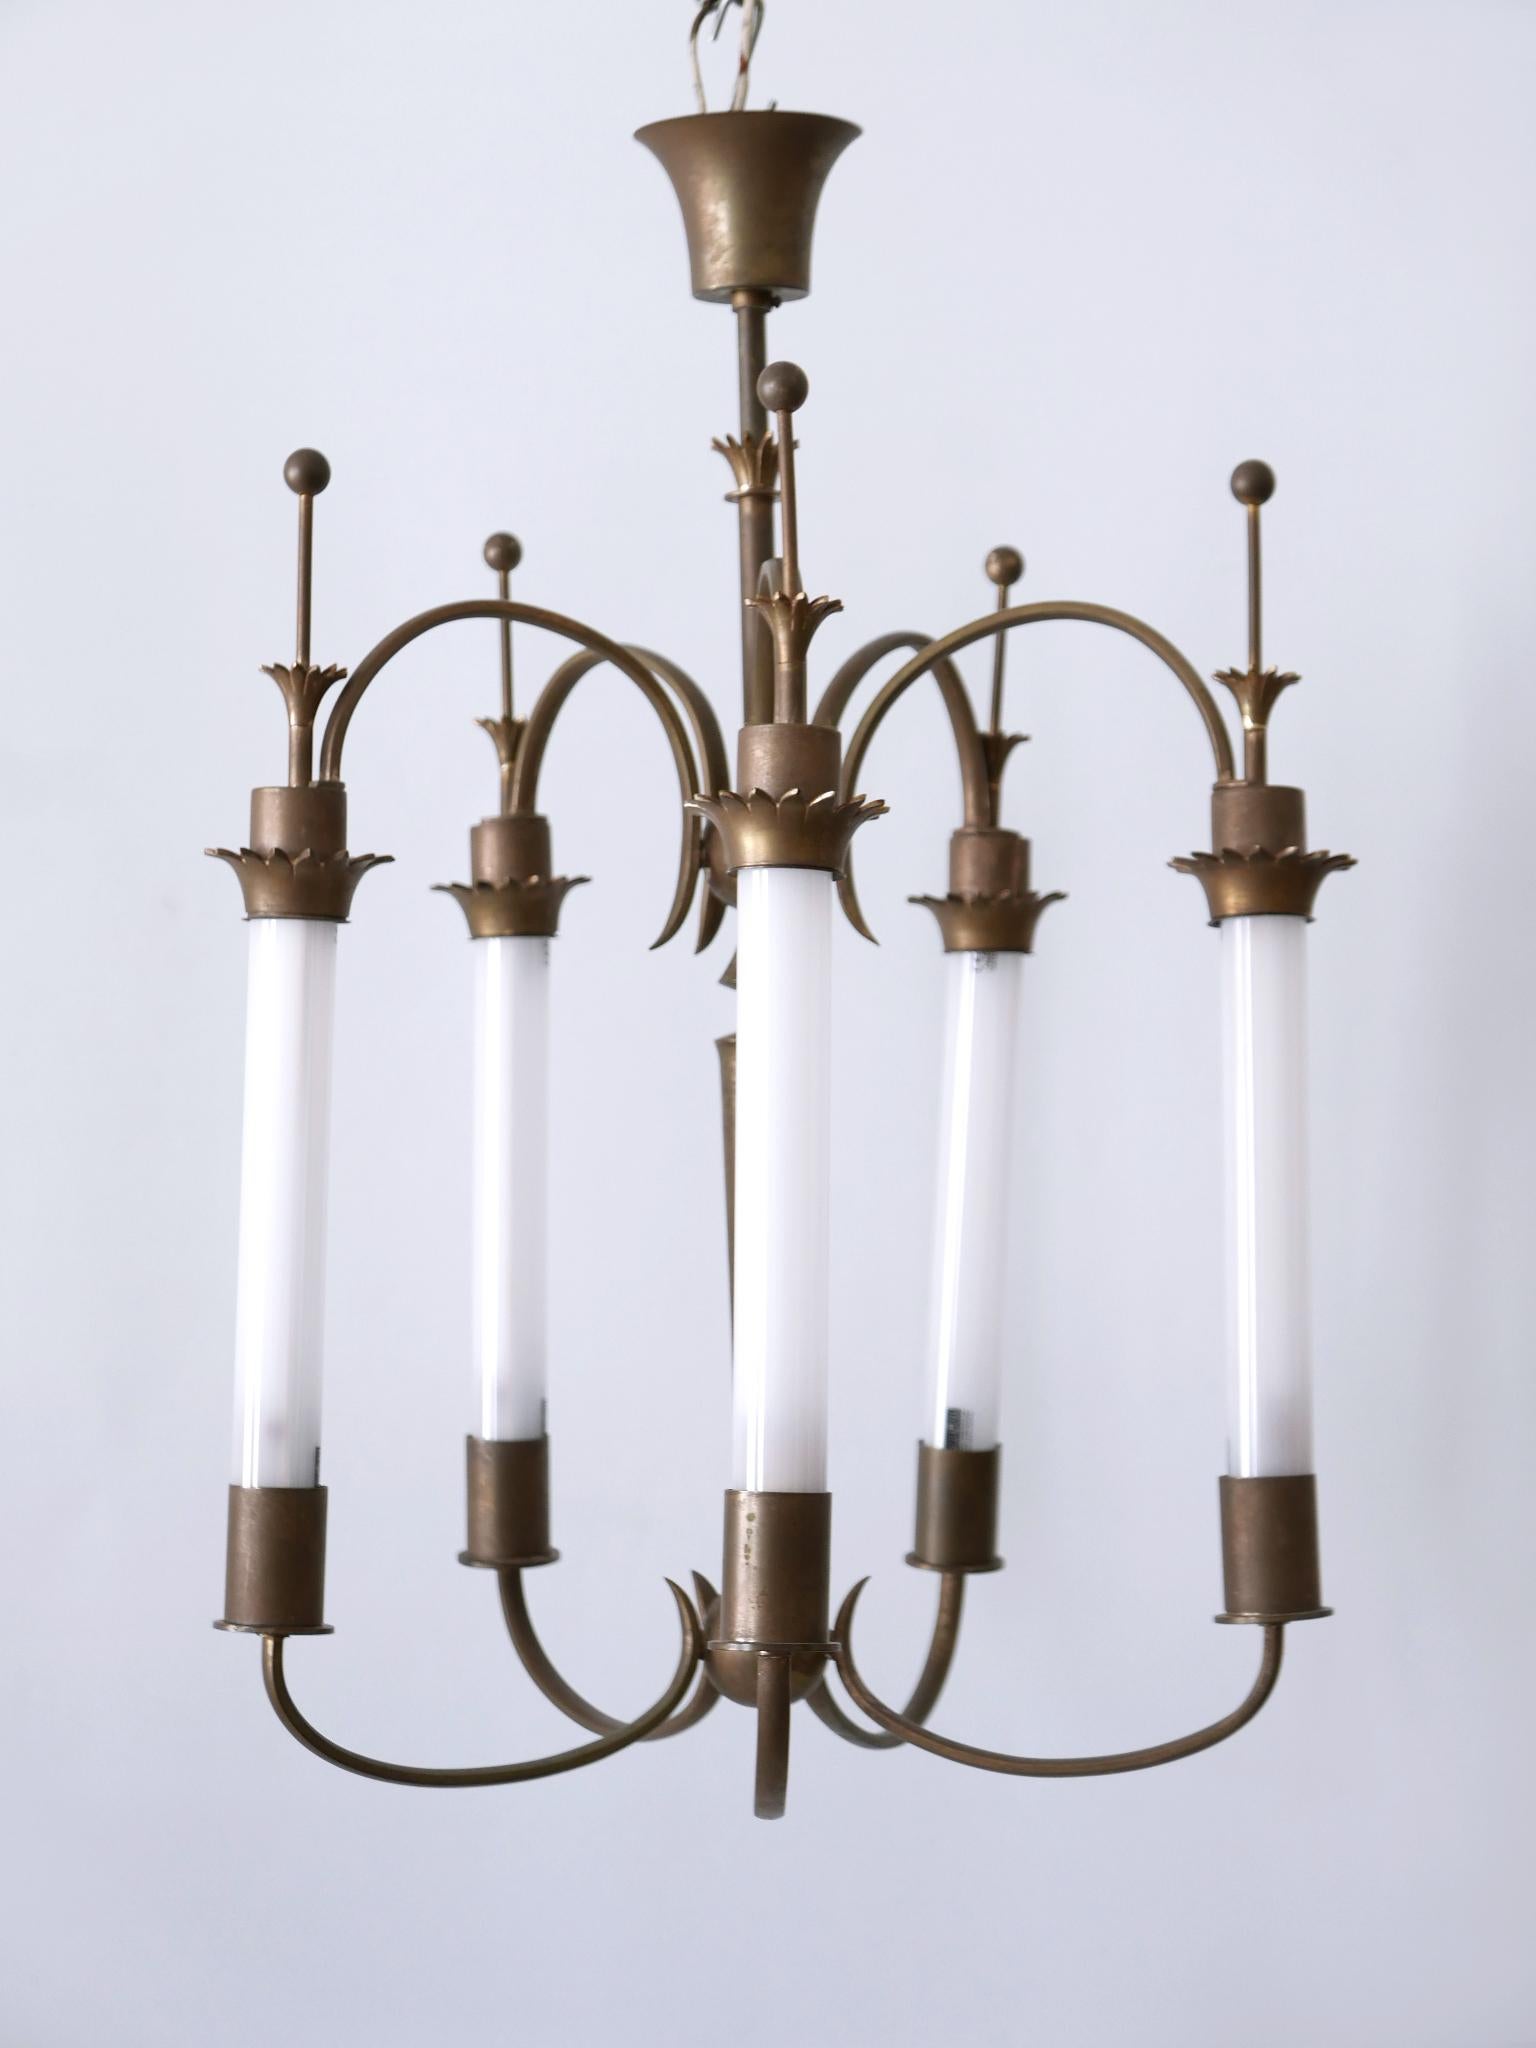 Exceptional Five-Flamed Art Deco Chandelier or Ceiling Lamp Germany 1930s In Good Condition For Sale In Munich, DE